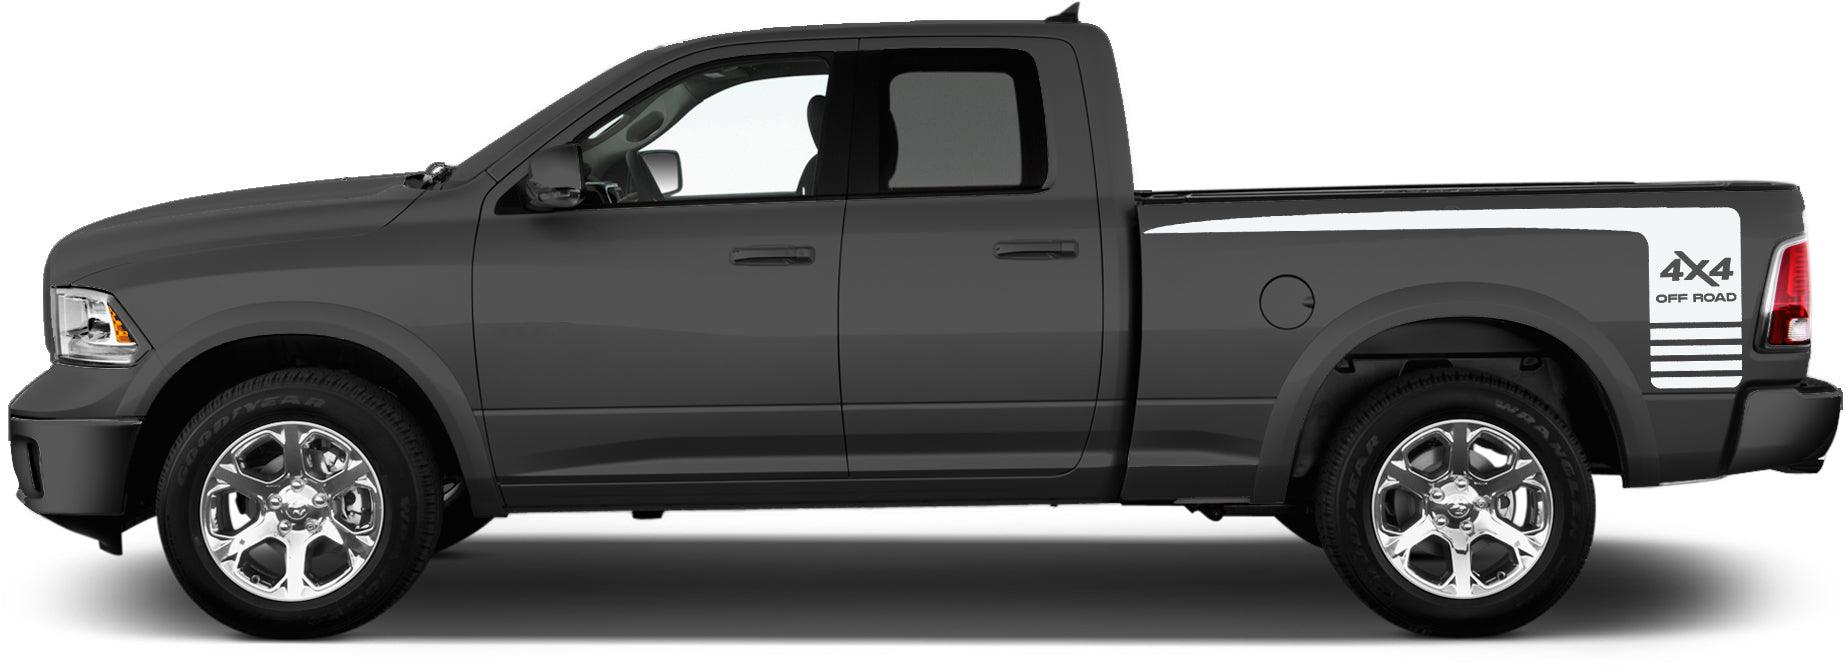 Dodge Ram 1500/2500/3500 (2009-2018) Custom Vinyl Decals, Graphics and Stickers - Hockey 4x4 bed decal (Pair) - Jkprostickers